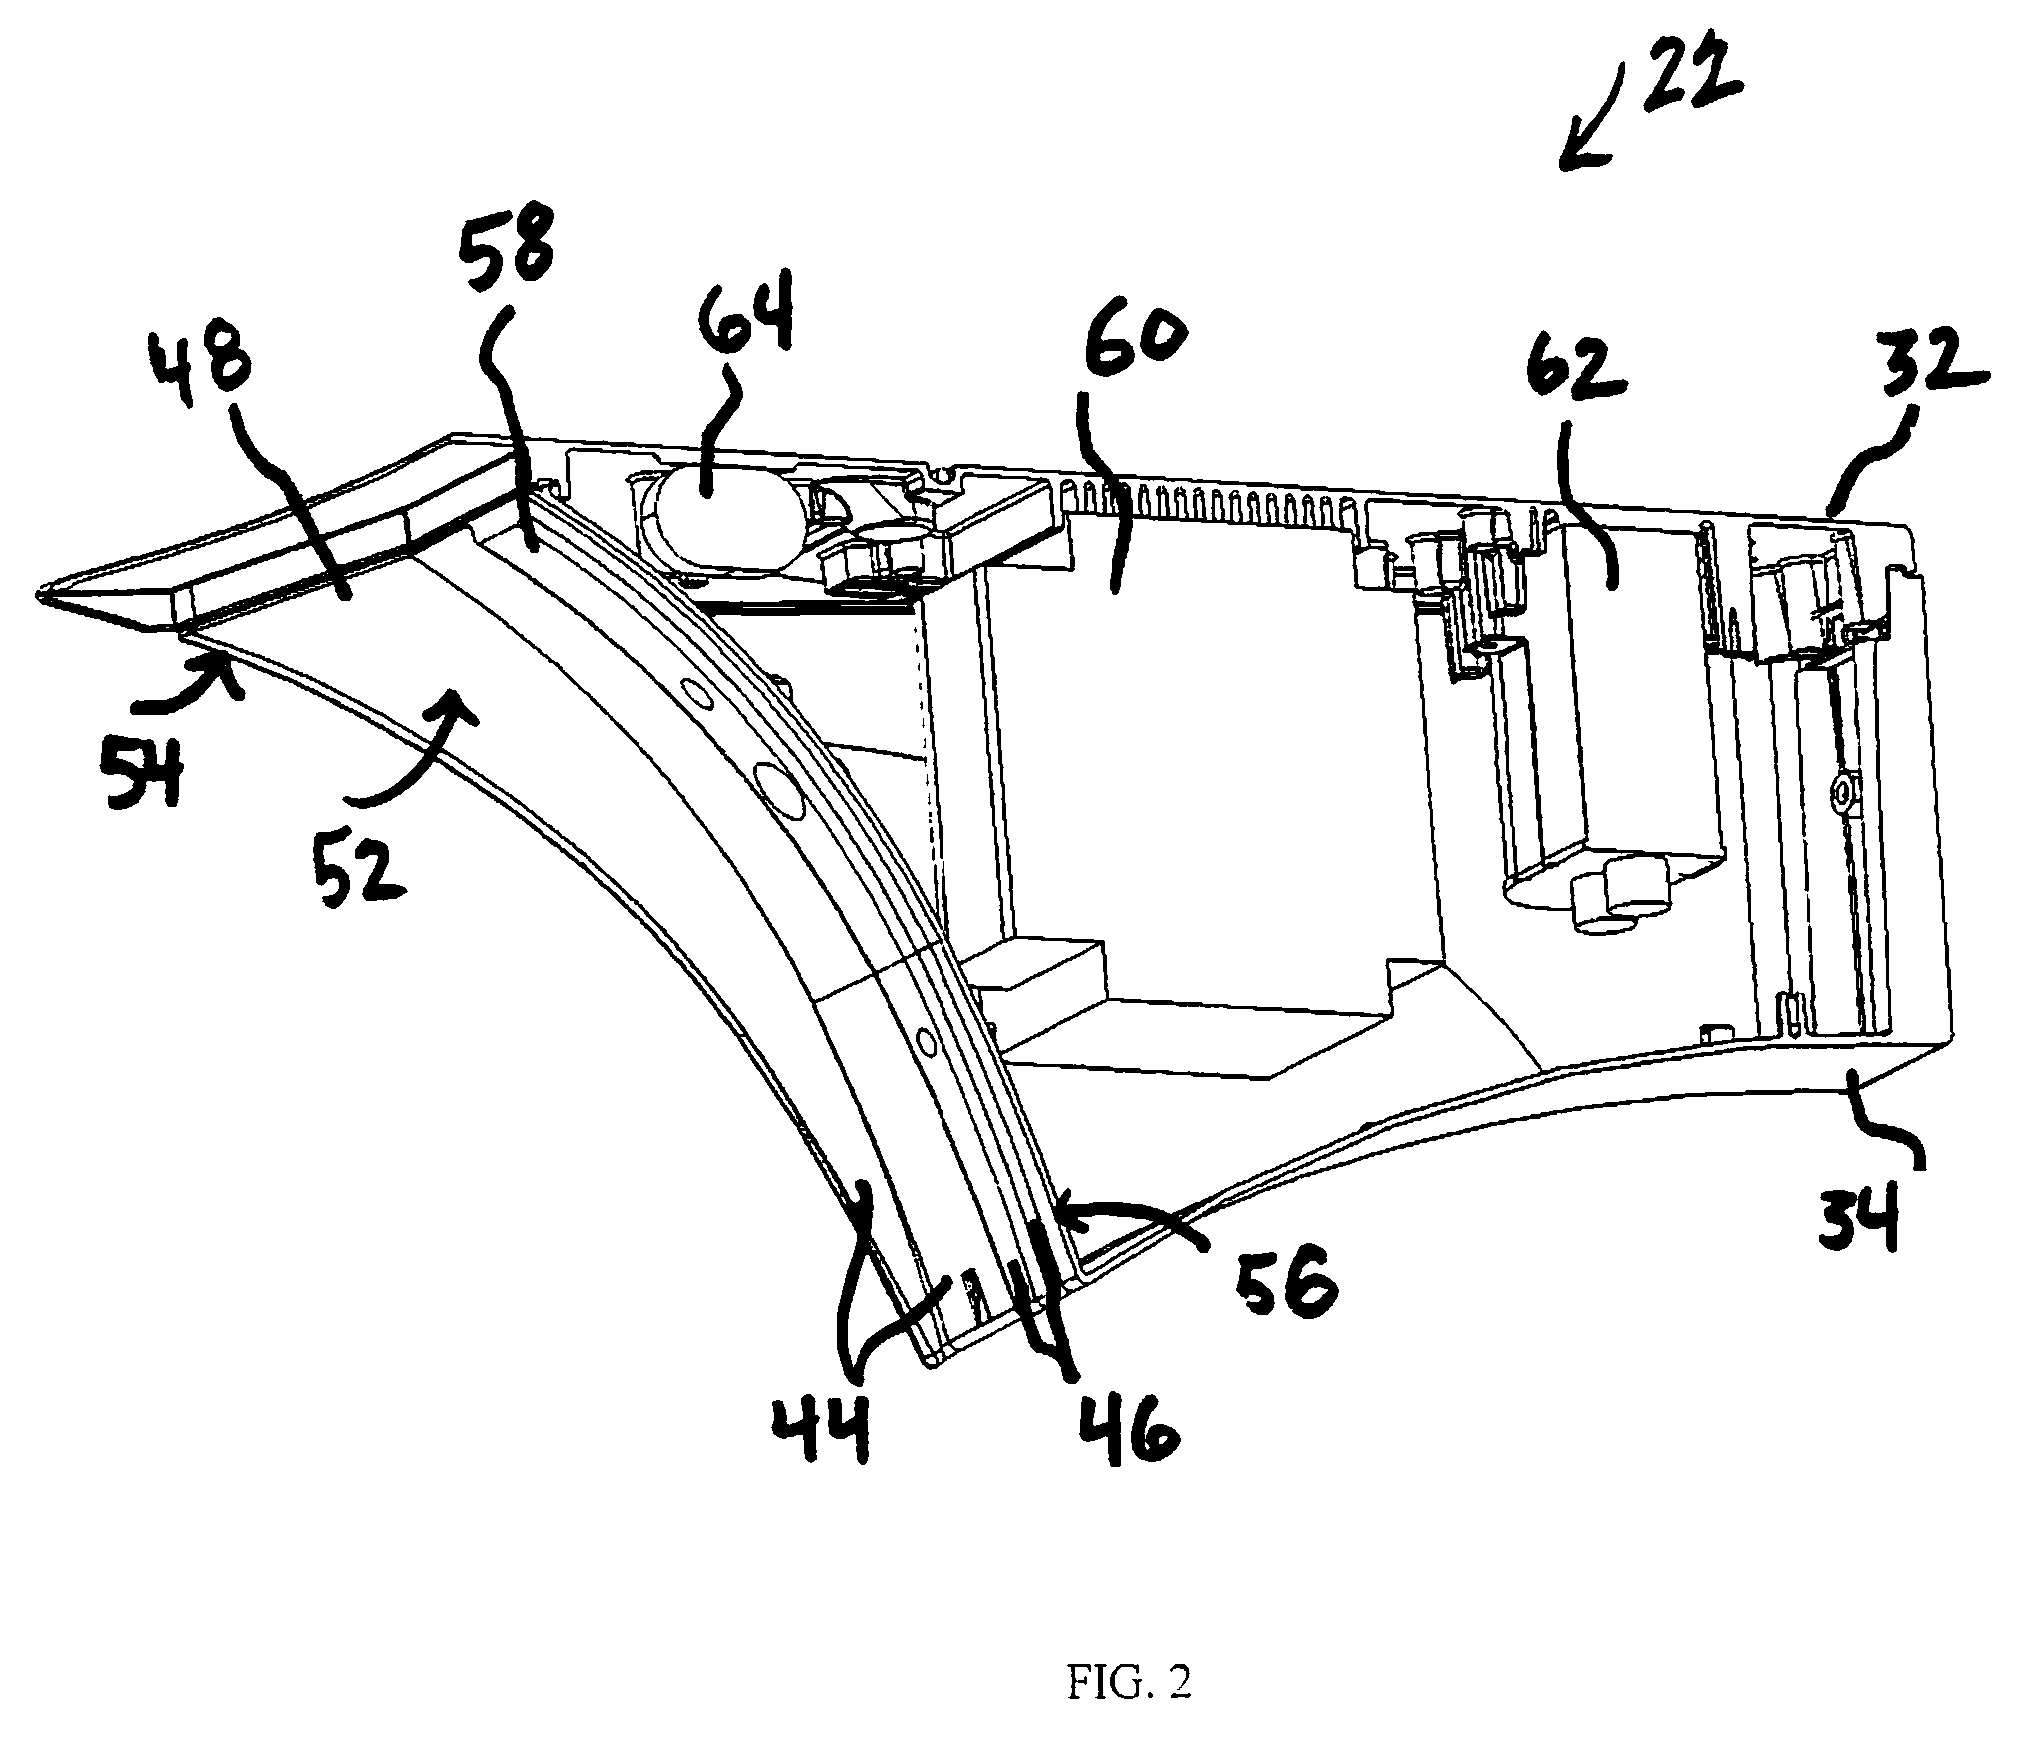 Remote ballast housing with airflow channel